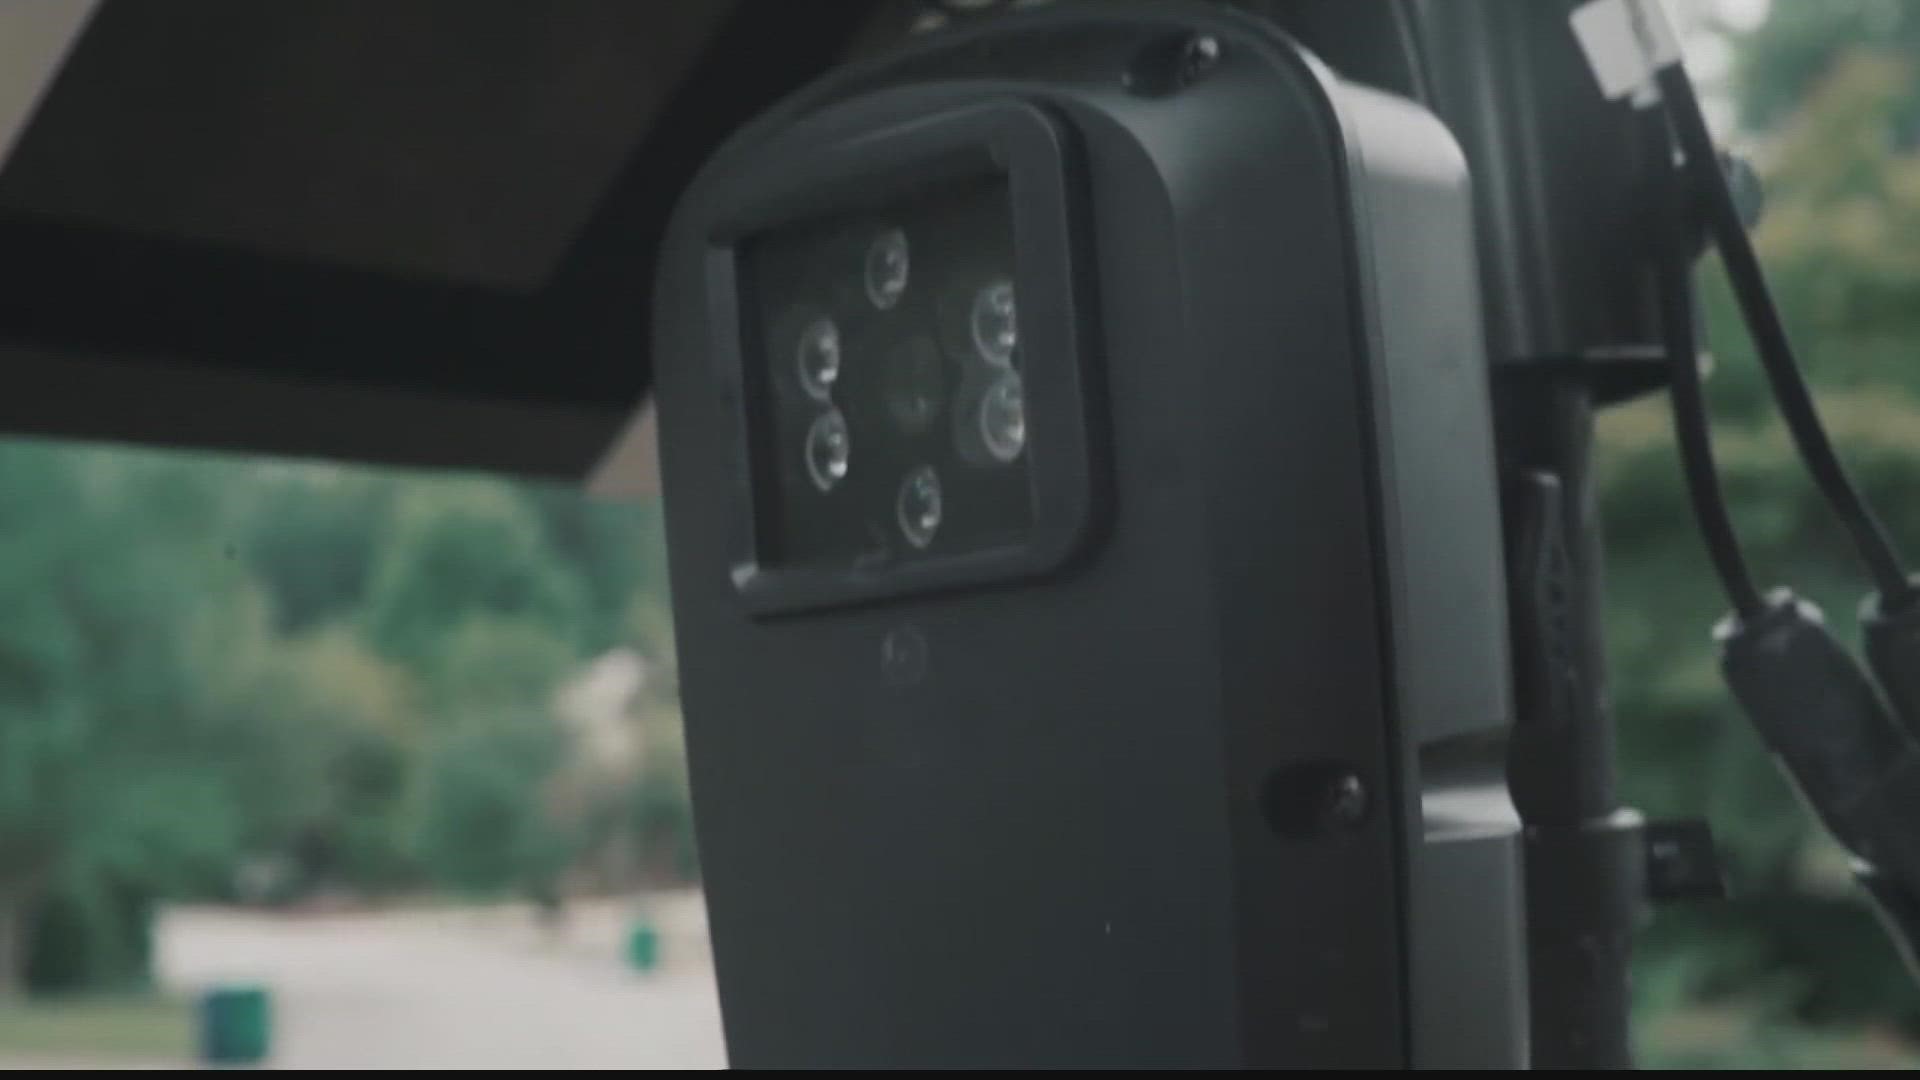 The cameras can scan license plates and other characters of any vehicle, but not people or their faces.